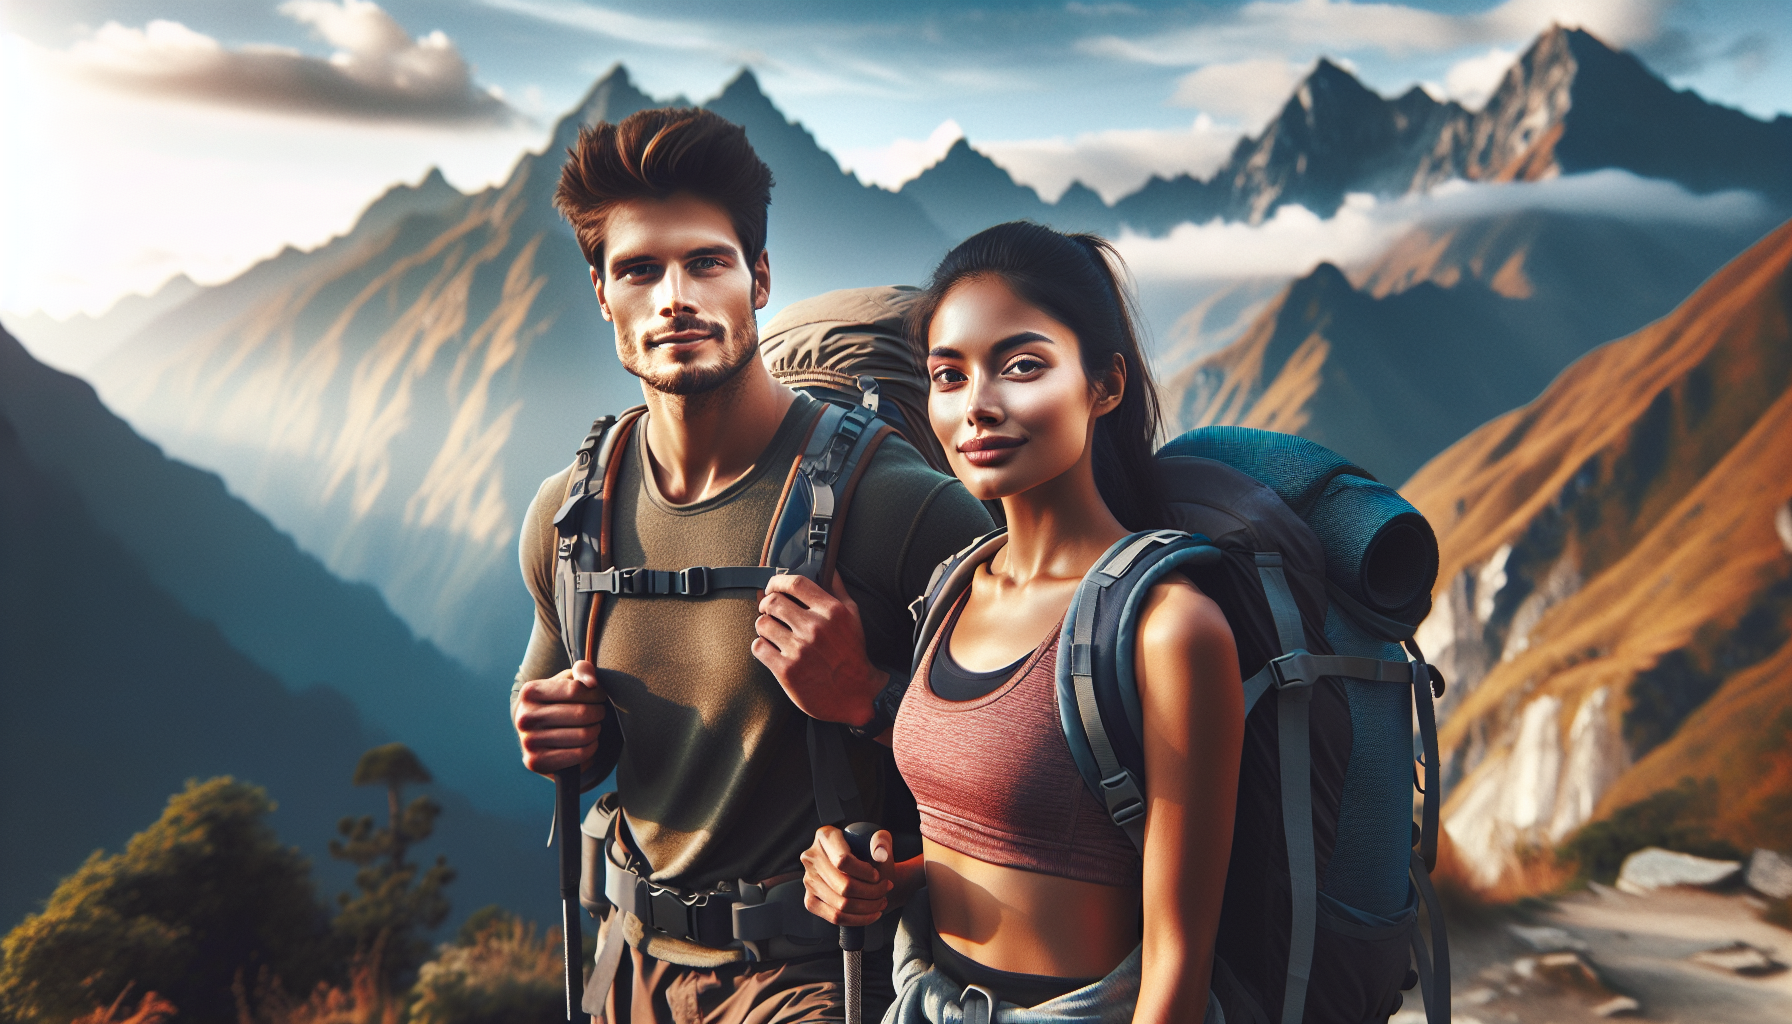 How Can I Prepare Physically And Mentally For Challenging Hikes With My Boyfriend?